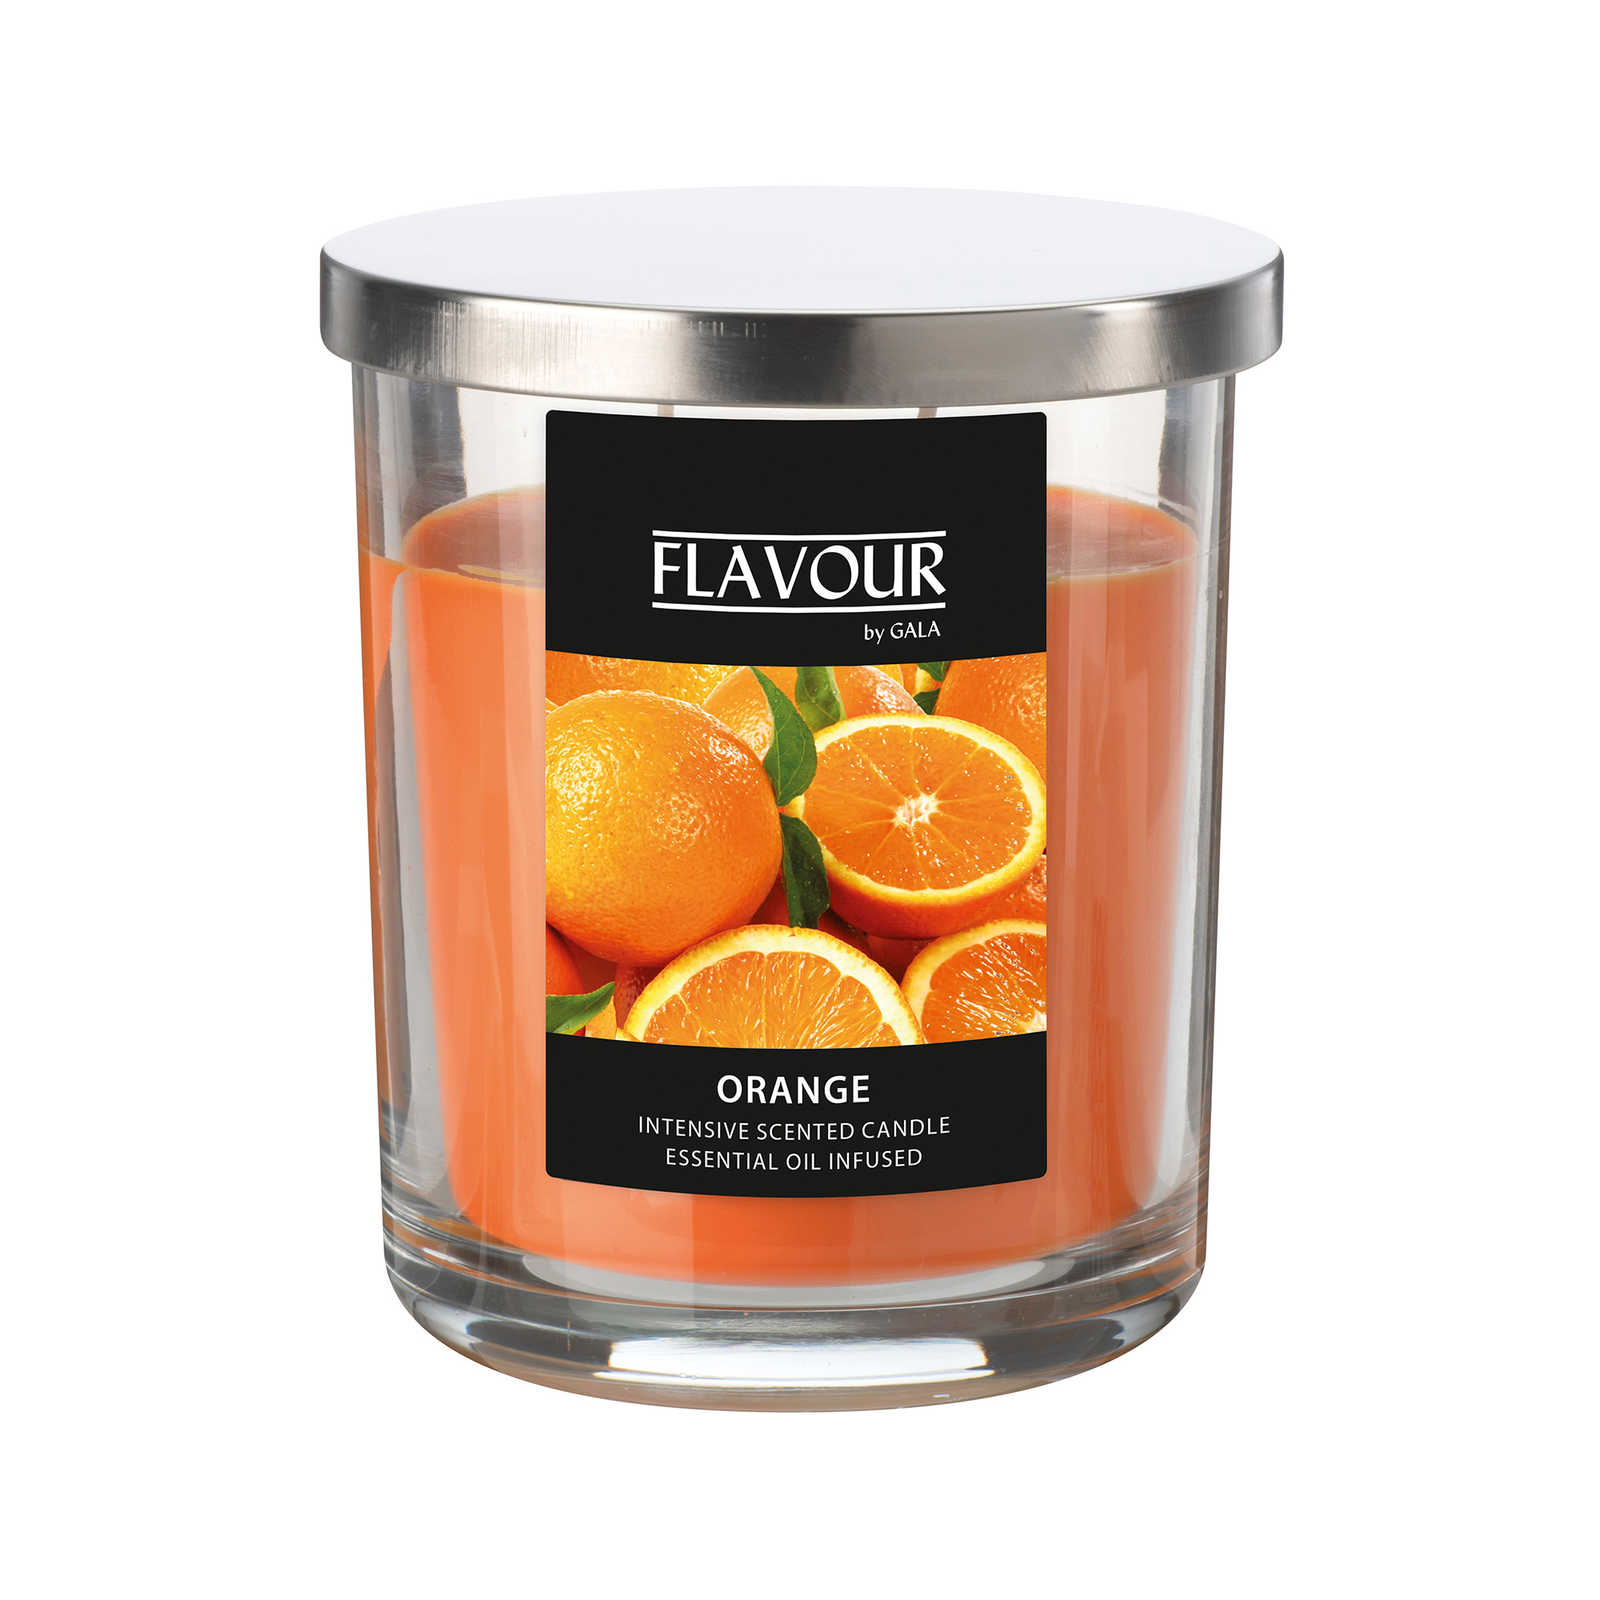         Orange Scented Candle with Mood Uplifting Fragrance - 380g
    